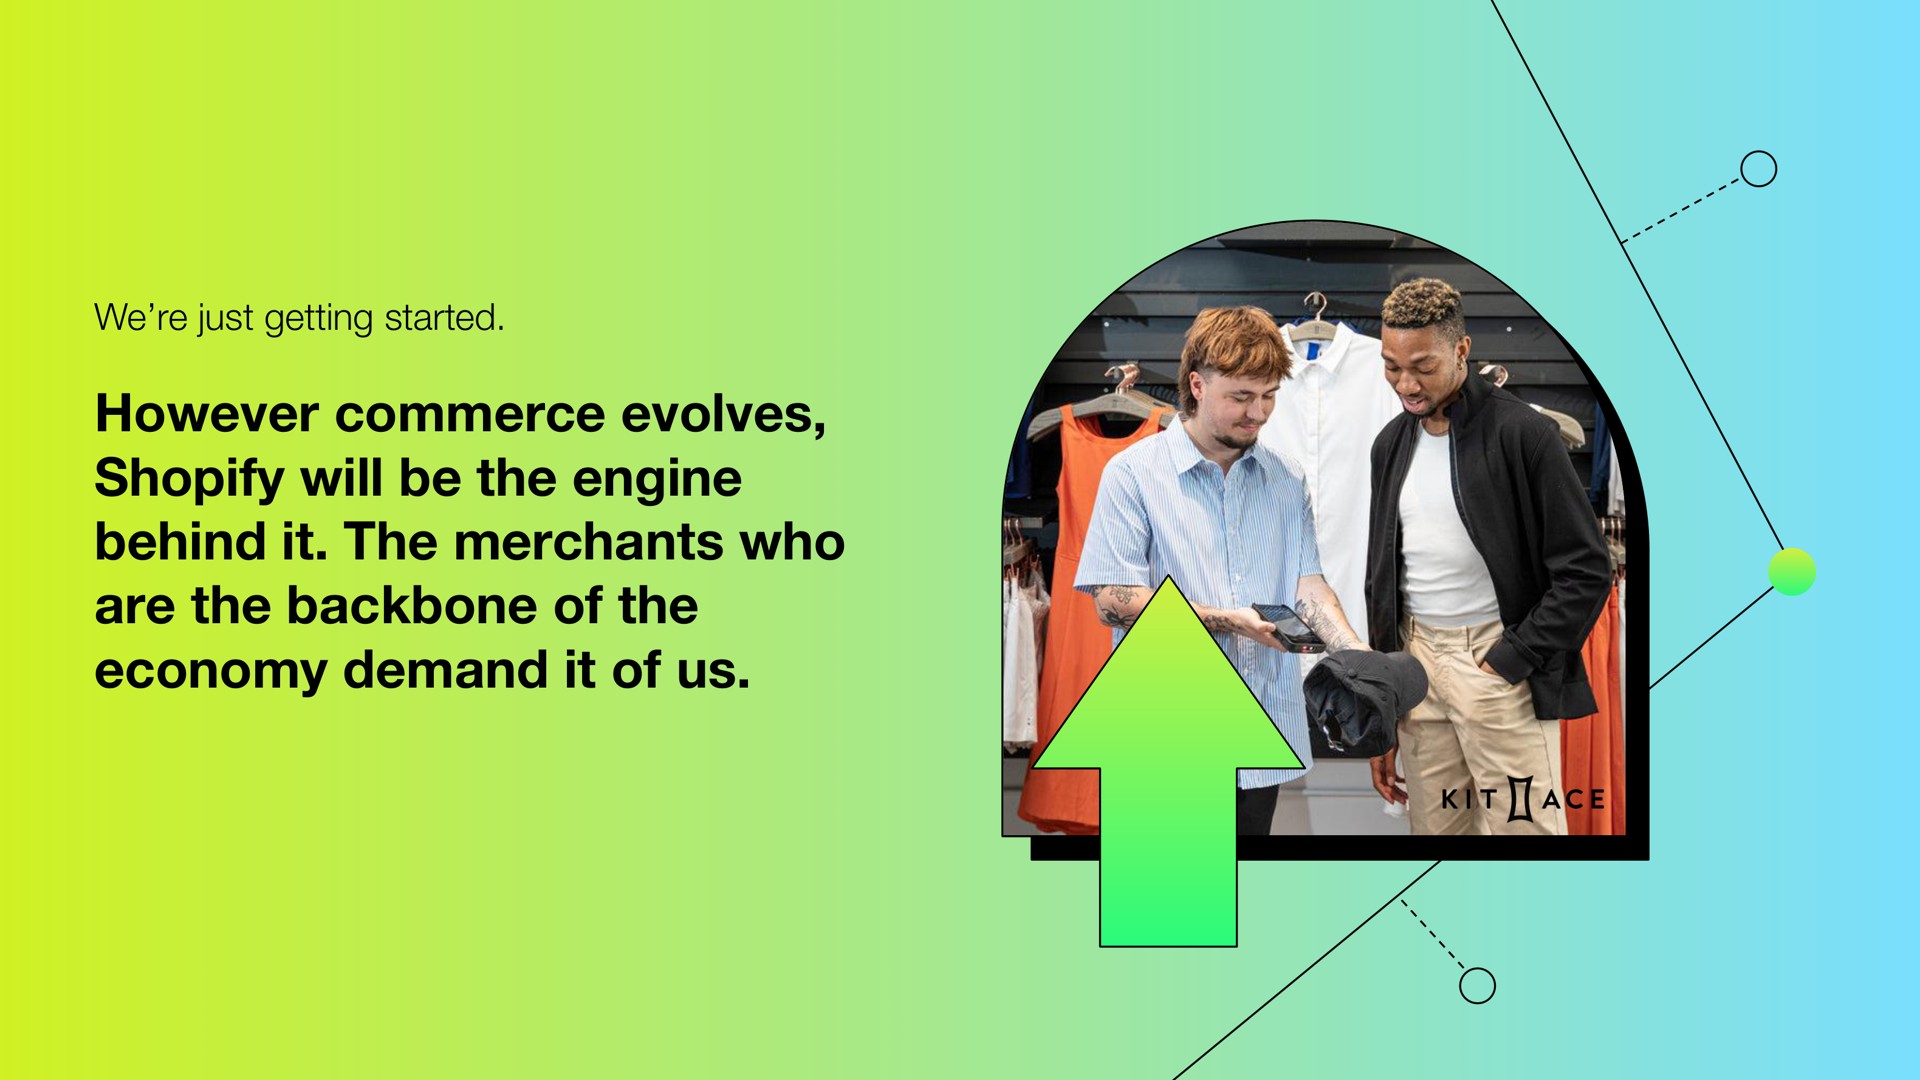 however commerce evolves will be the engine behind it the merchants who are the backbone of the economy demand it of us | Shopify